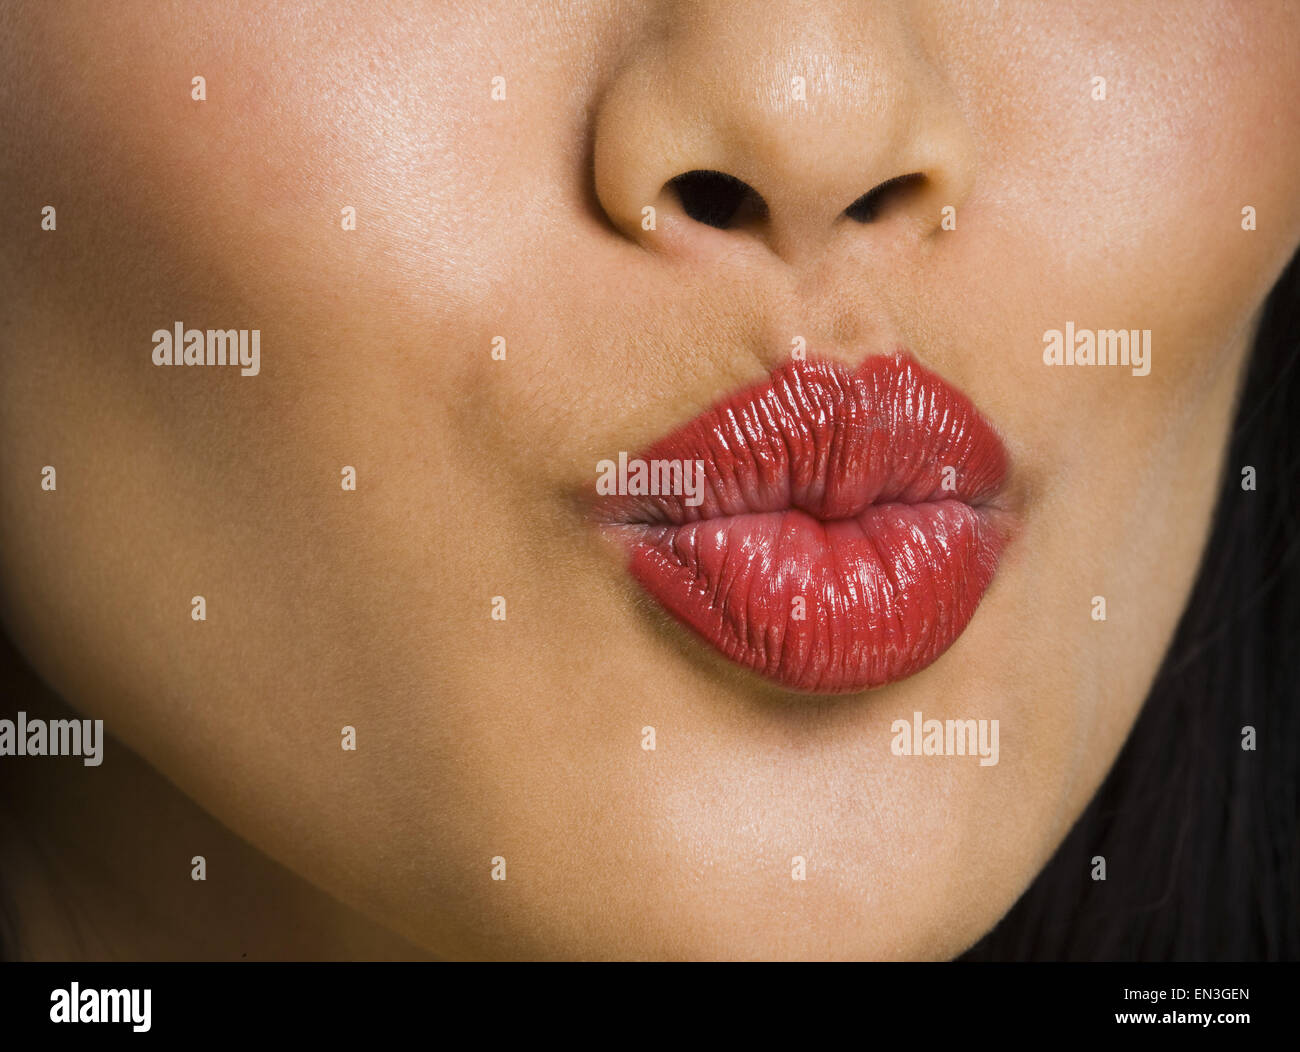 Closeup of female mouth with red lipstick puckering Stock Photo